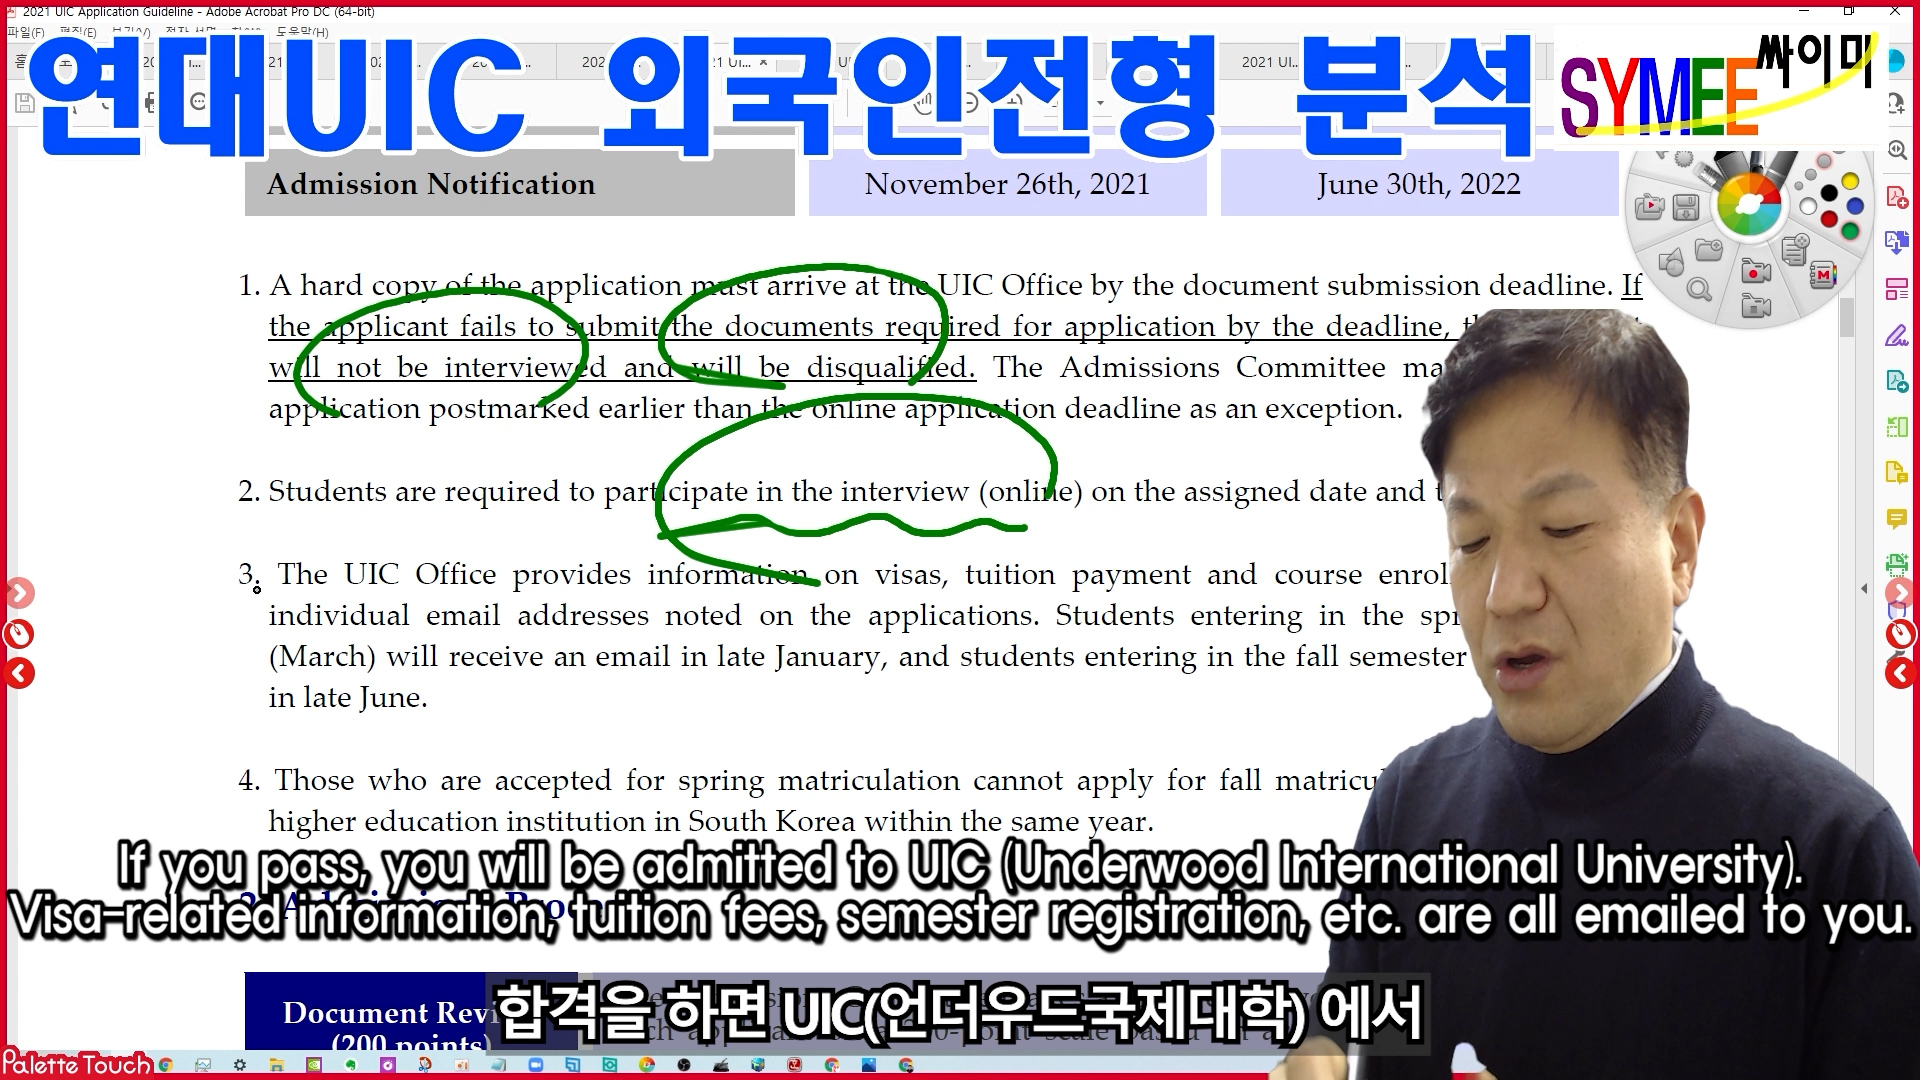 Yonsei Univ. Admission for UIC for Foreign Student 03 Admission Procedure.00_02_29_53.스틸 005.jpg